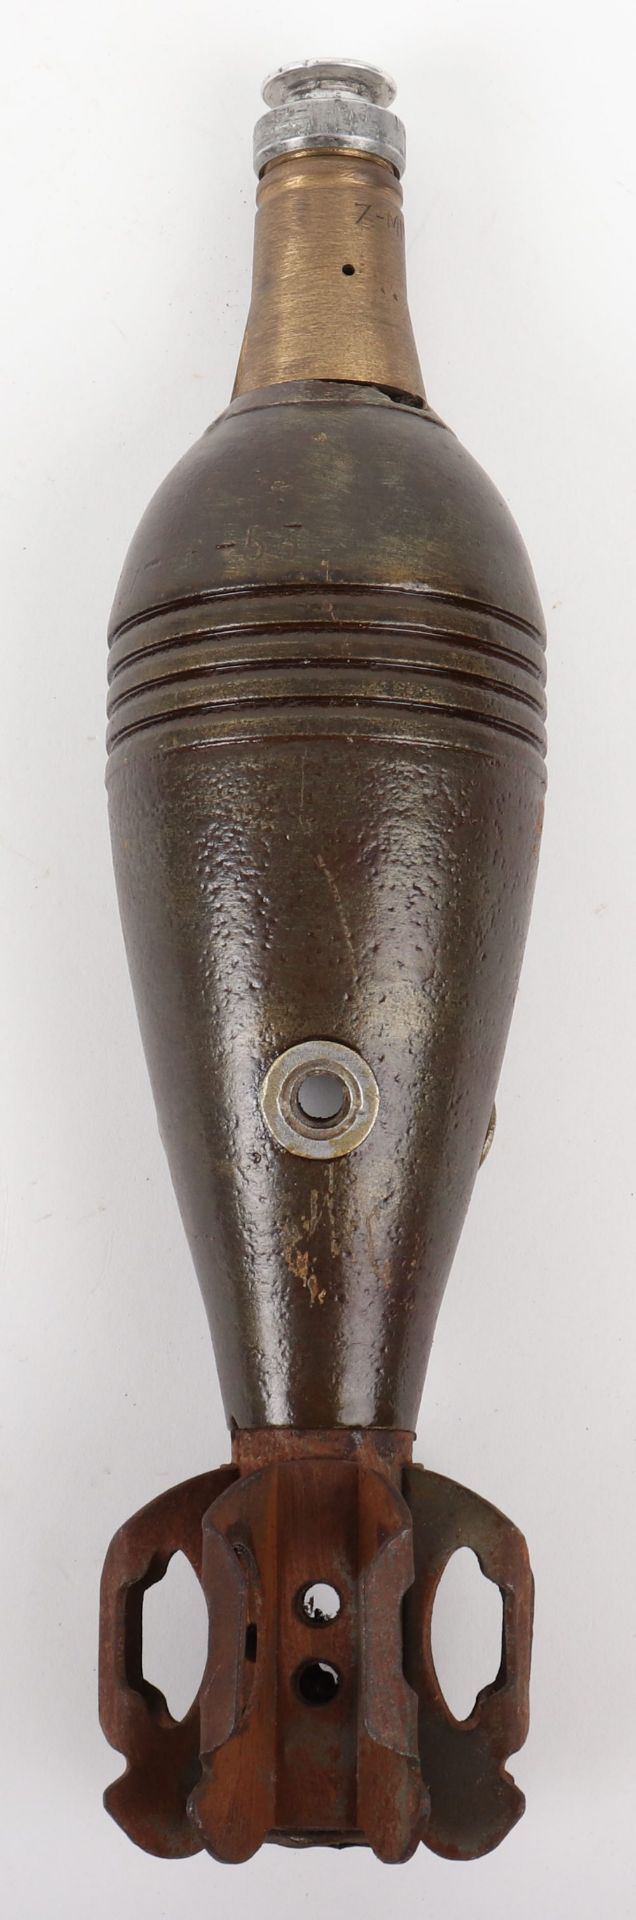 Scarce Inert WW2 German Sectioned Mortar Round - Image 7 of 7